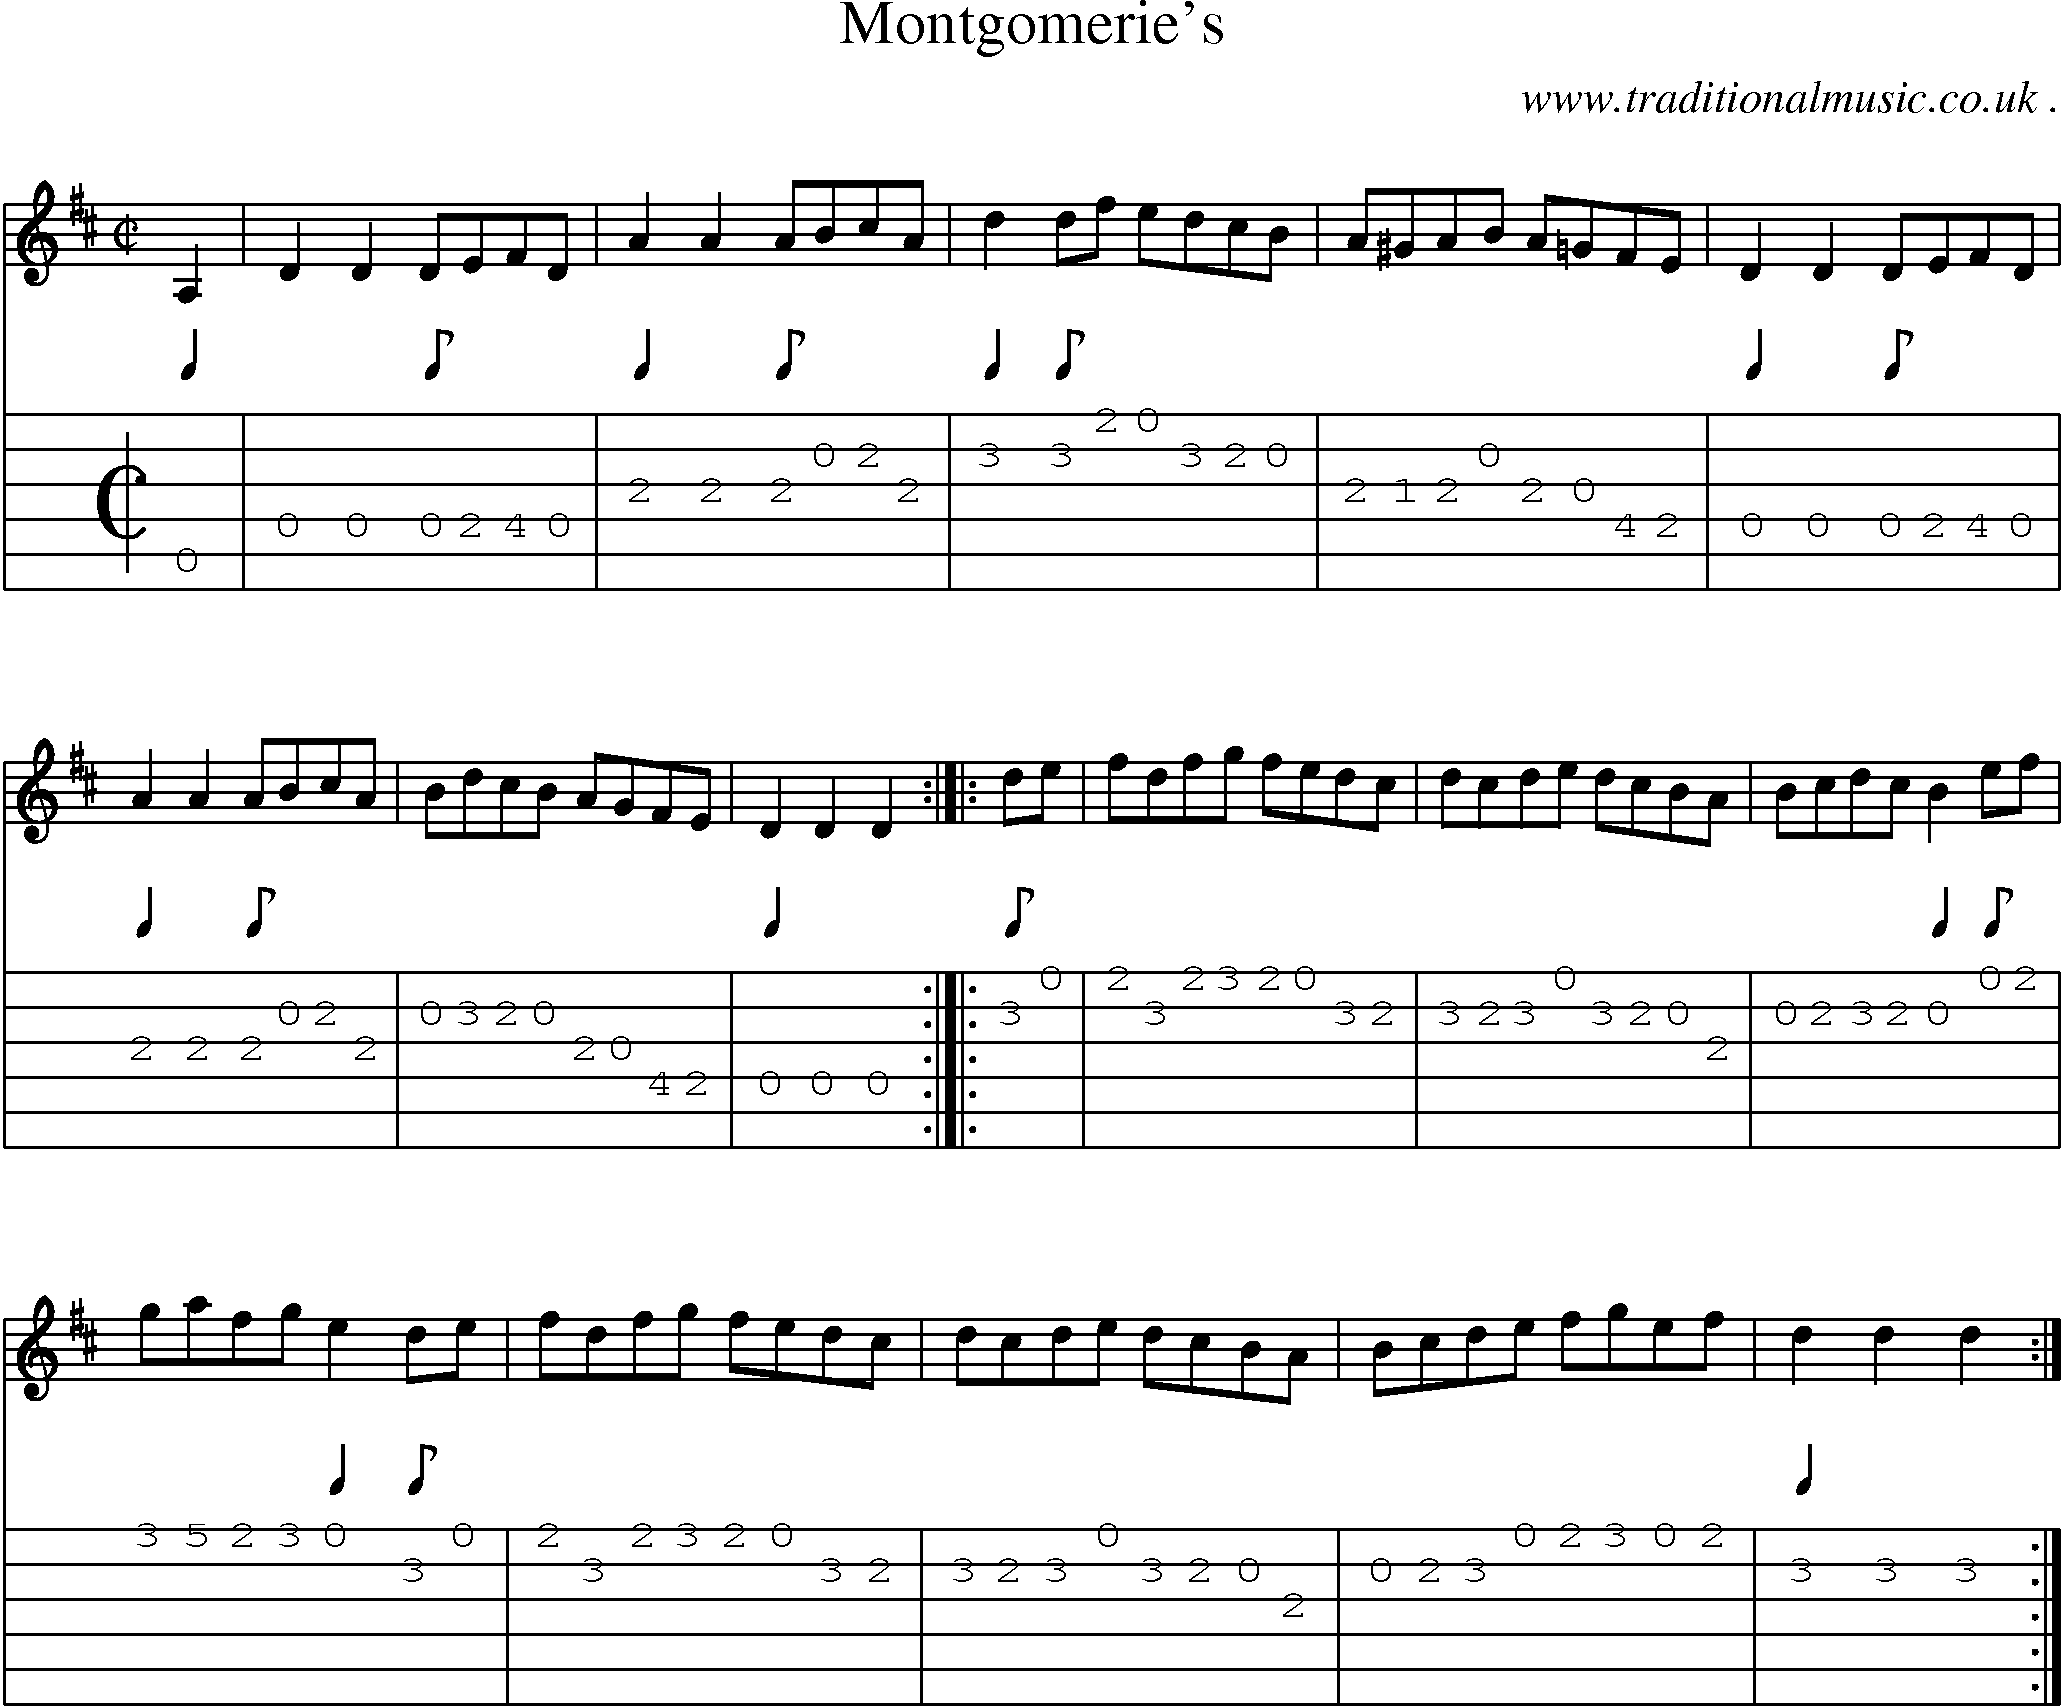 Sheet-music  score, Chords and Guitar Tabs for Montgomeries